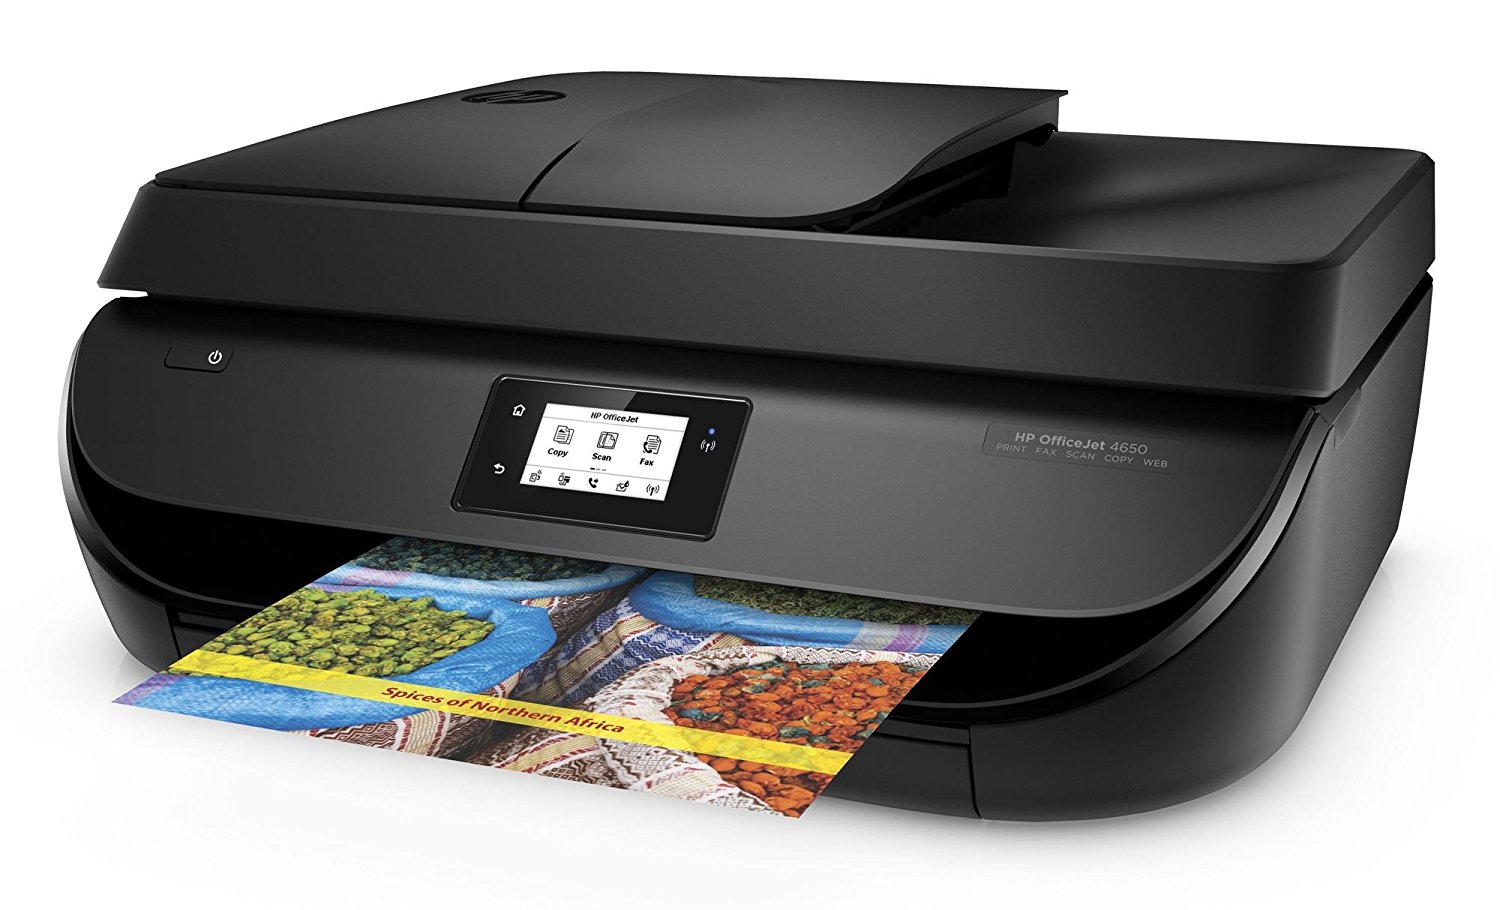 How to Install HP OfficeJet 4650 on Ubuntu GNU/Linux - Featured